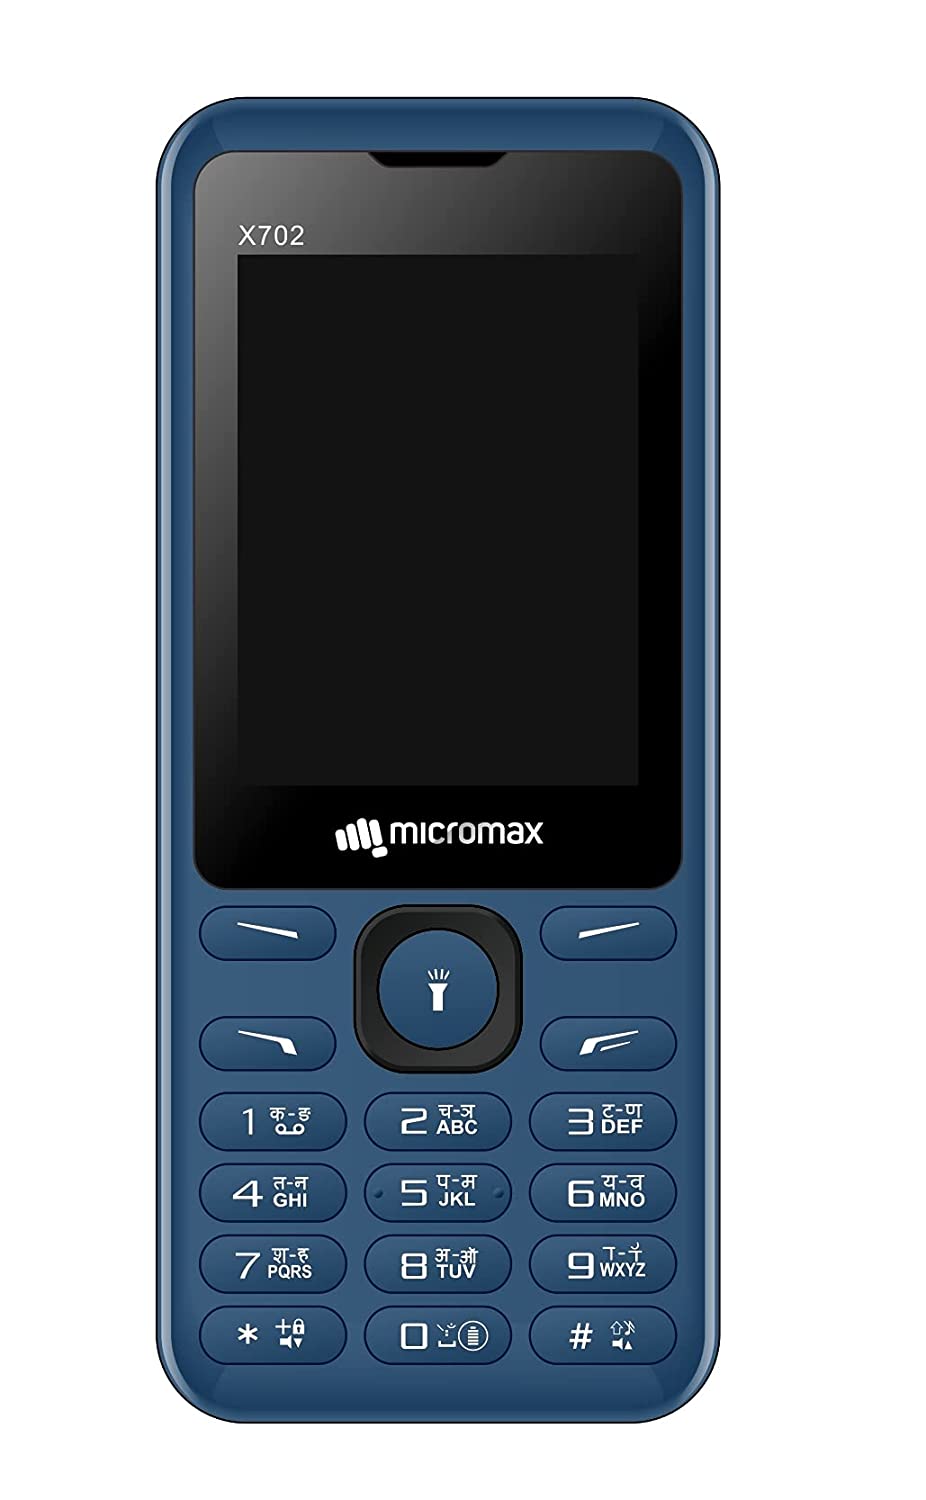 Micromax X702 (Blue) 1000 mAh Battery with Power Saving Mode-Mobile Phones-dealsplant